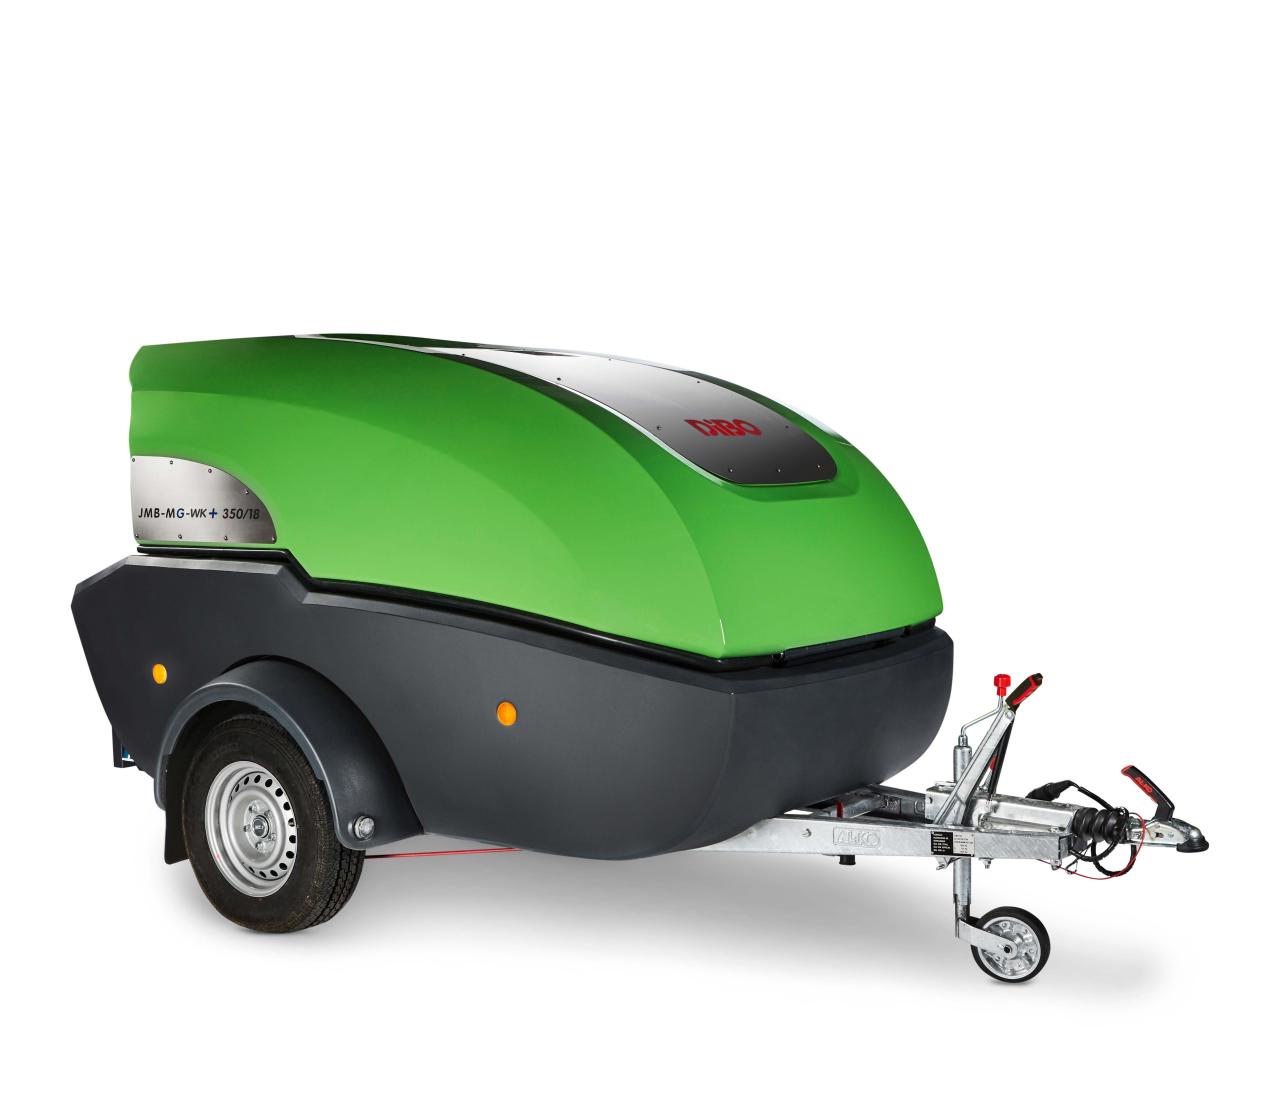 DiBO JMB-M-WK weedkillers on trailer operating either entirely on CNG gas (MG version) or on a battery pack (ME version)